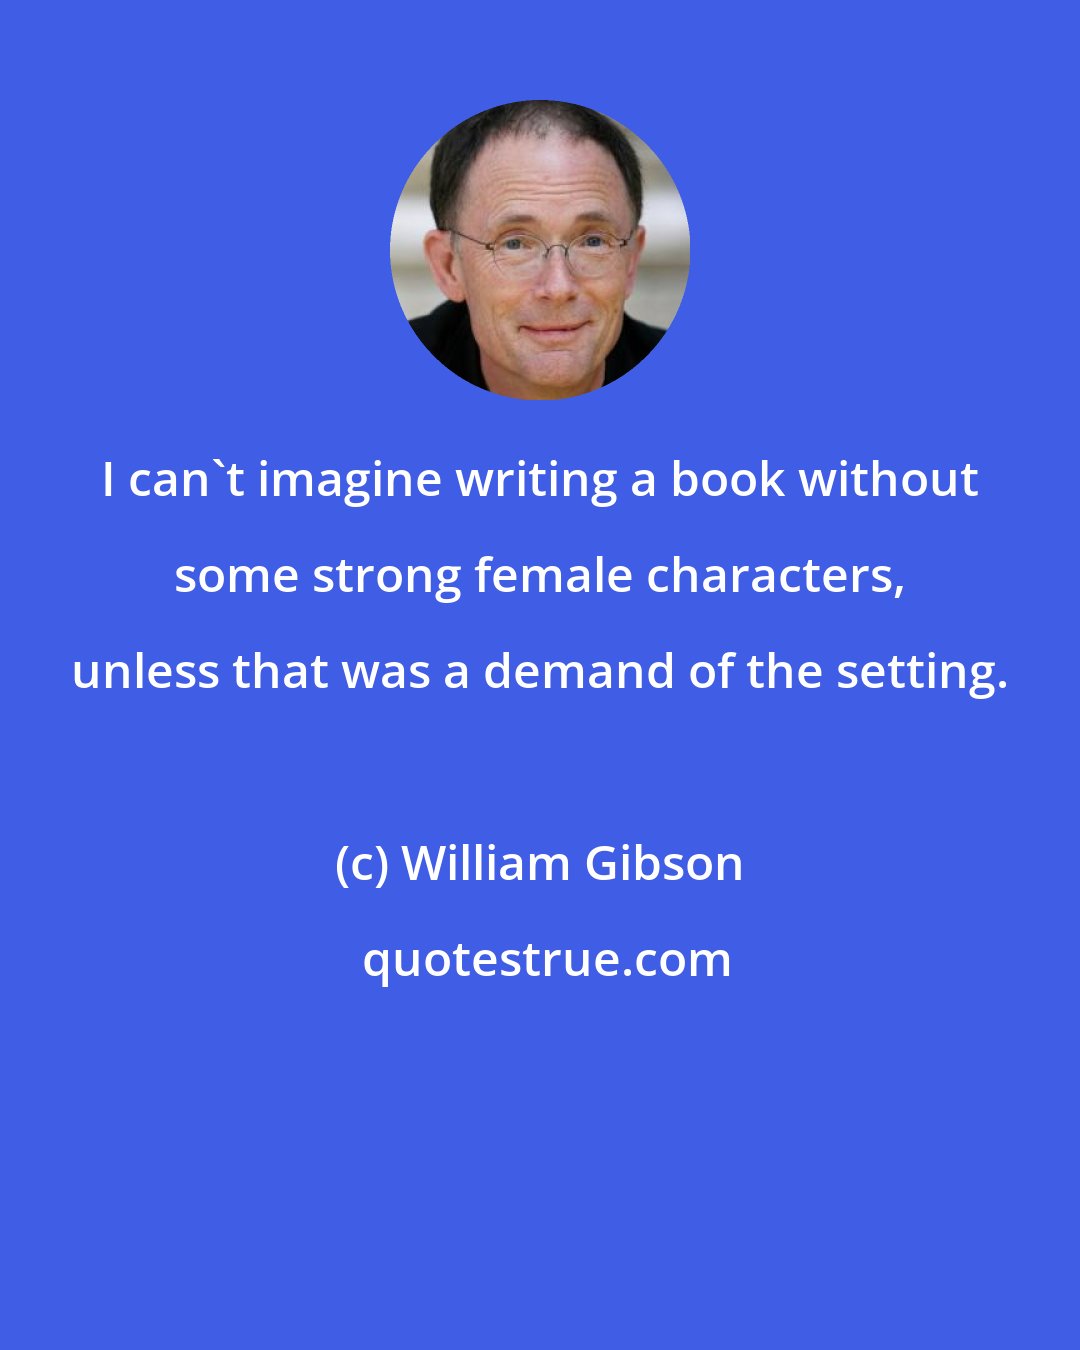 William Gibson: I can't imagine writing a book without some strong female characters, unless that was a demand of the setting.